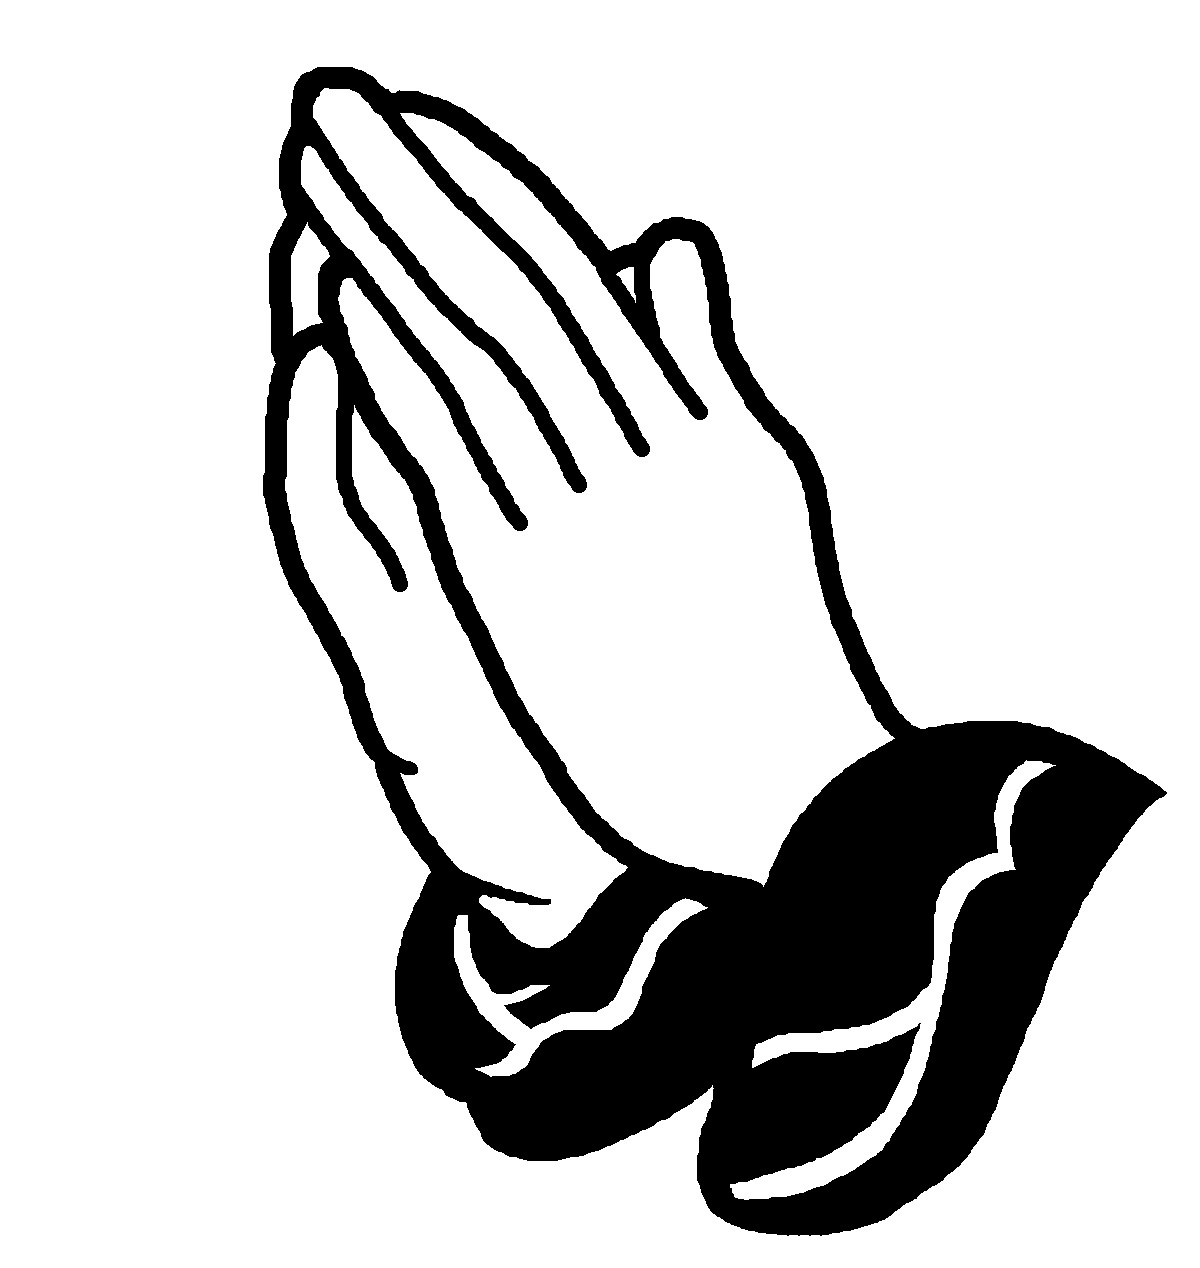 Open praying hands clipart free clipart images 2